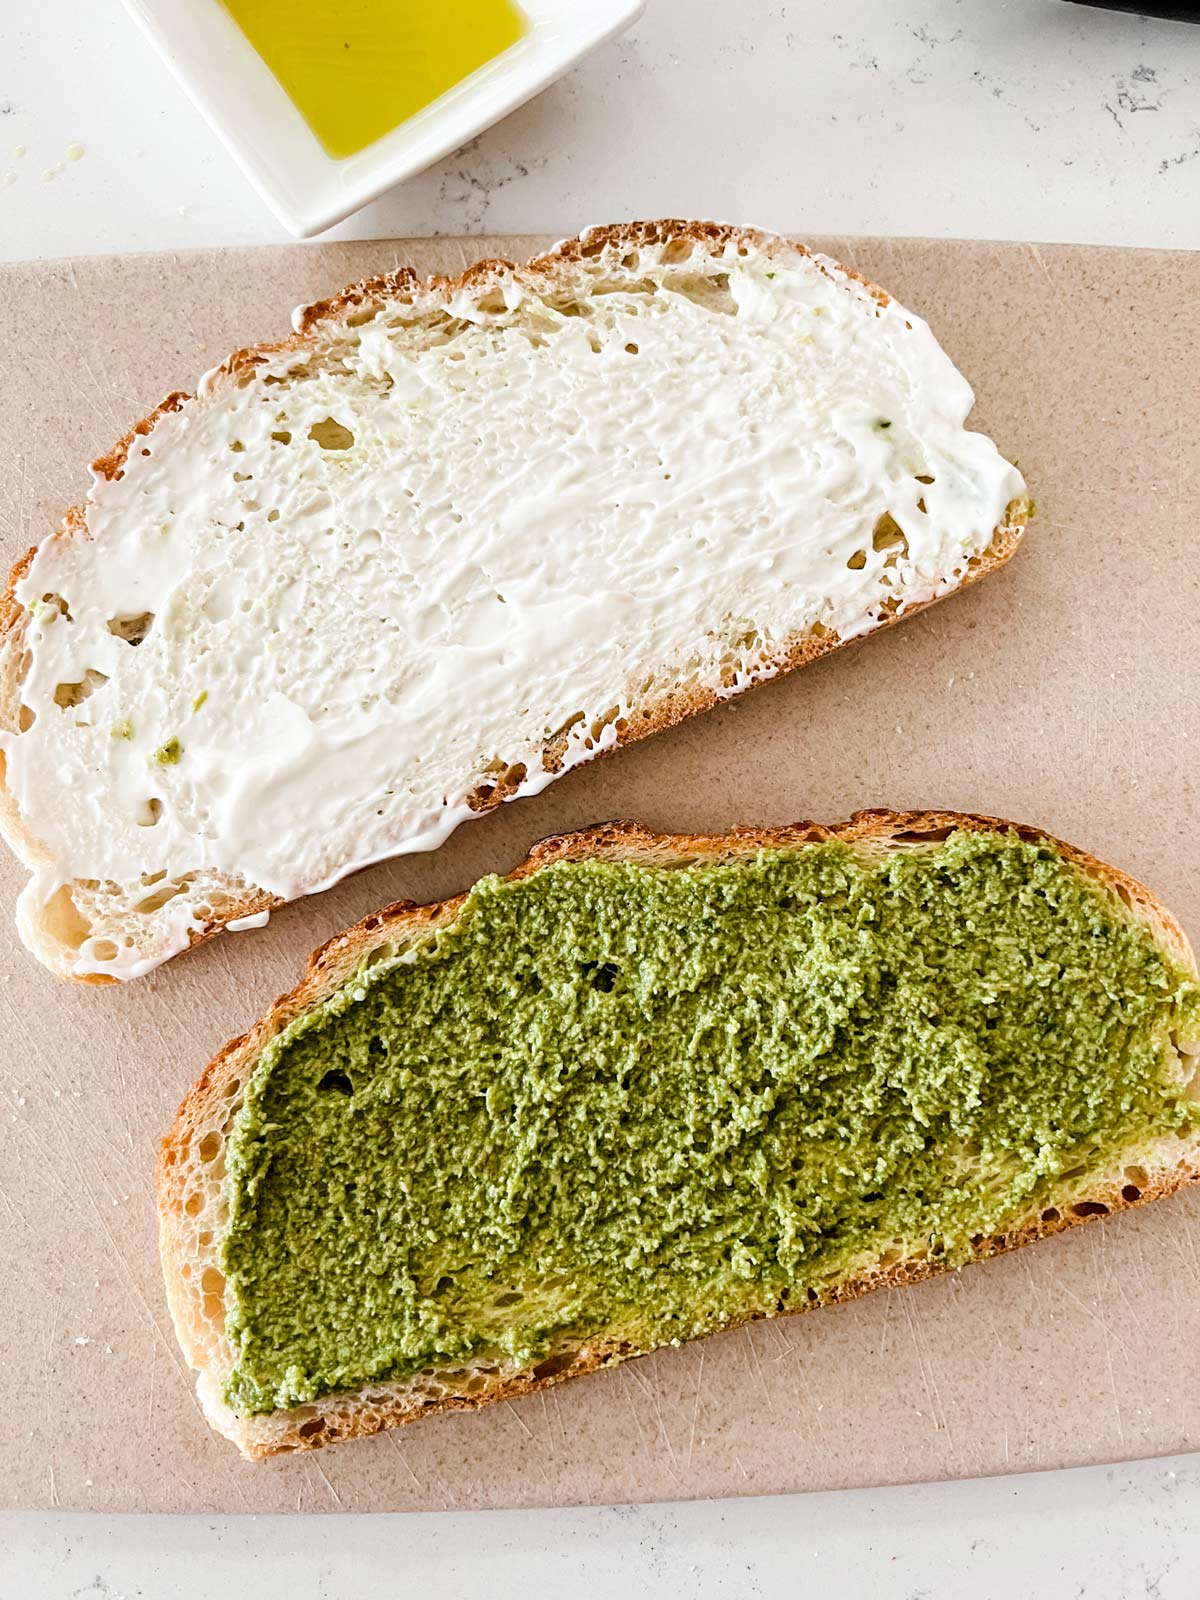 A slice of bread with mayo on it sitting next to a slice of bread with pesto.